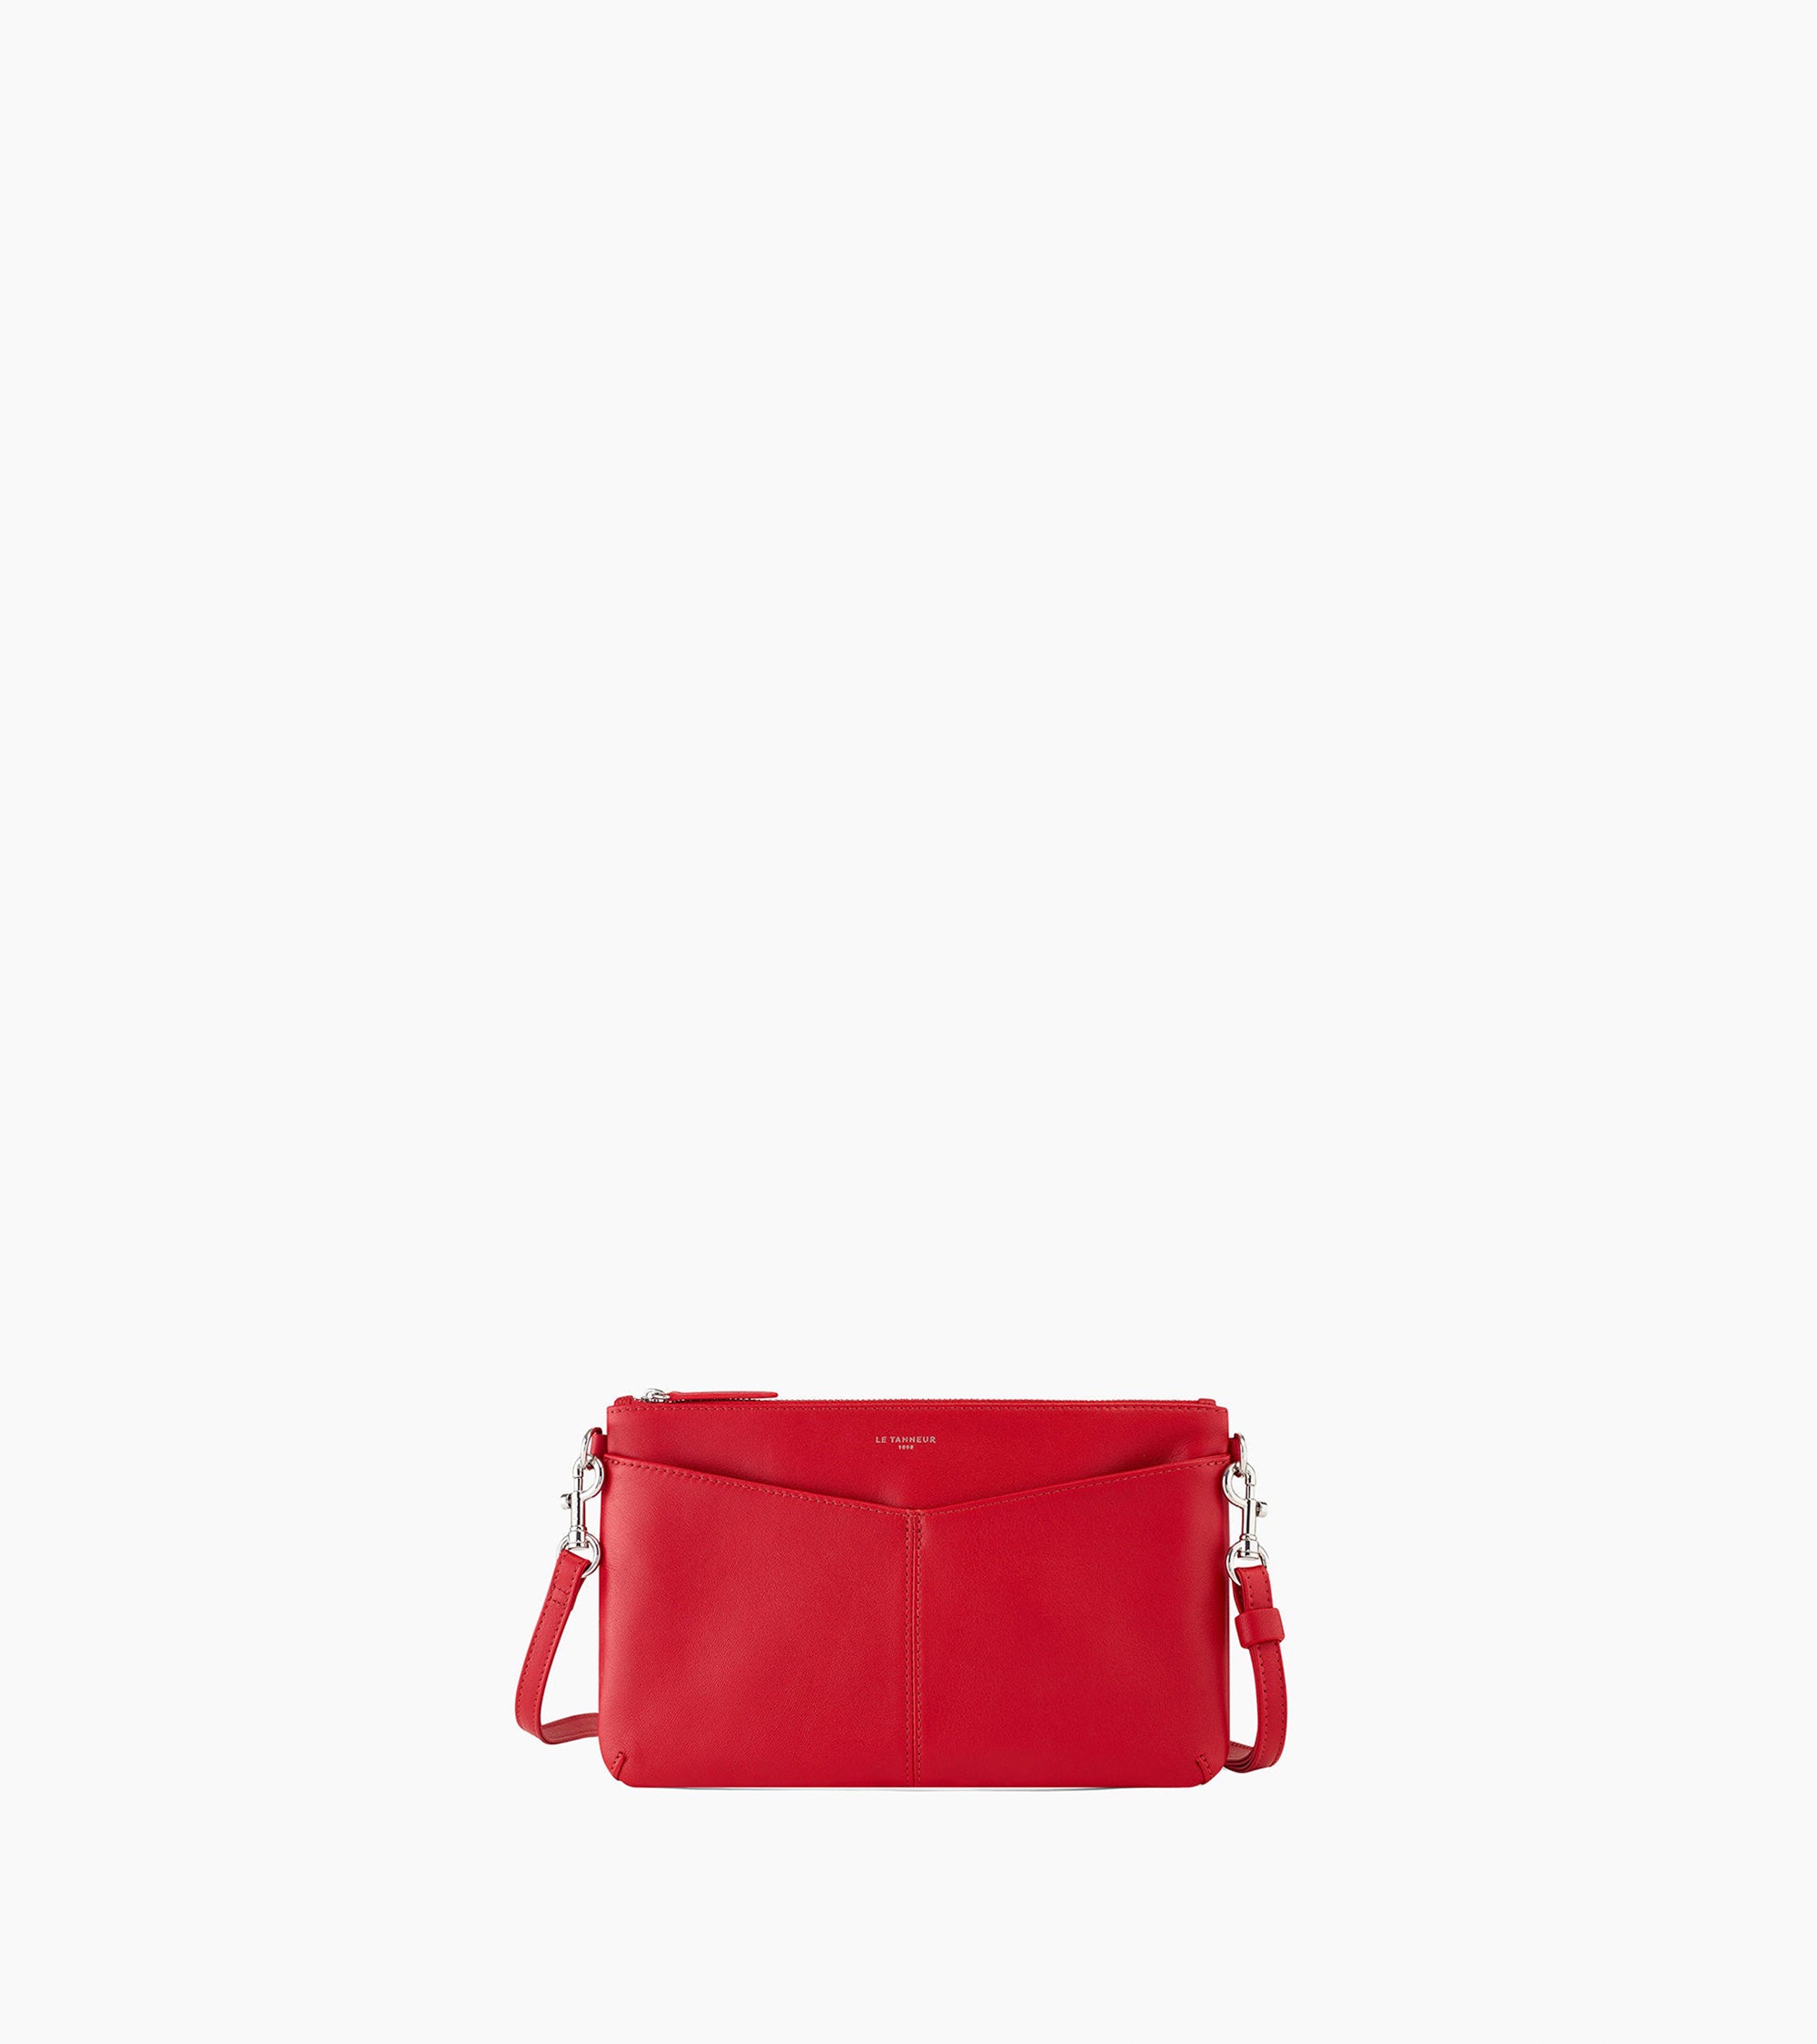 Zipped Charlotte smooth leather pouch with removable strap